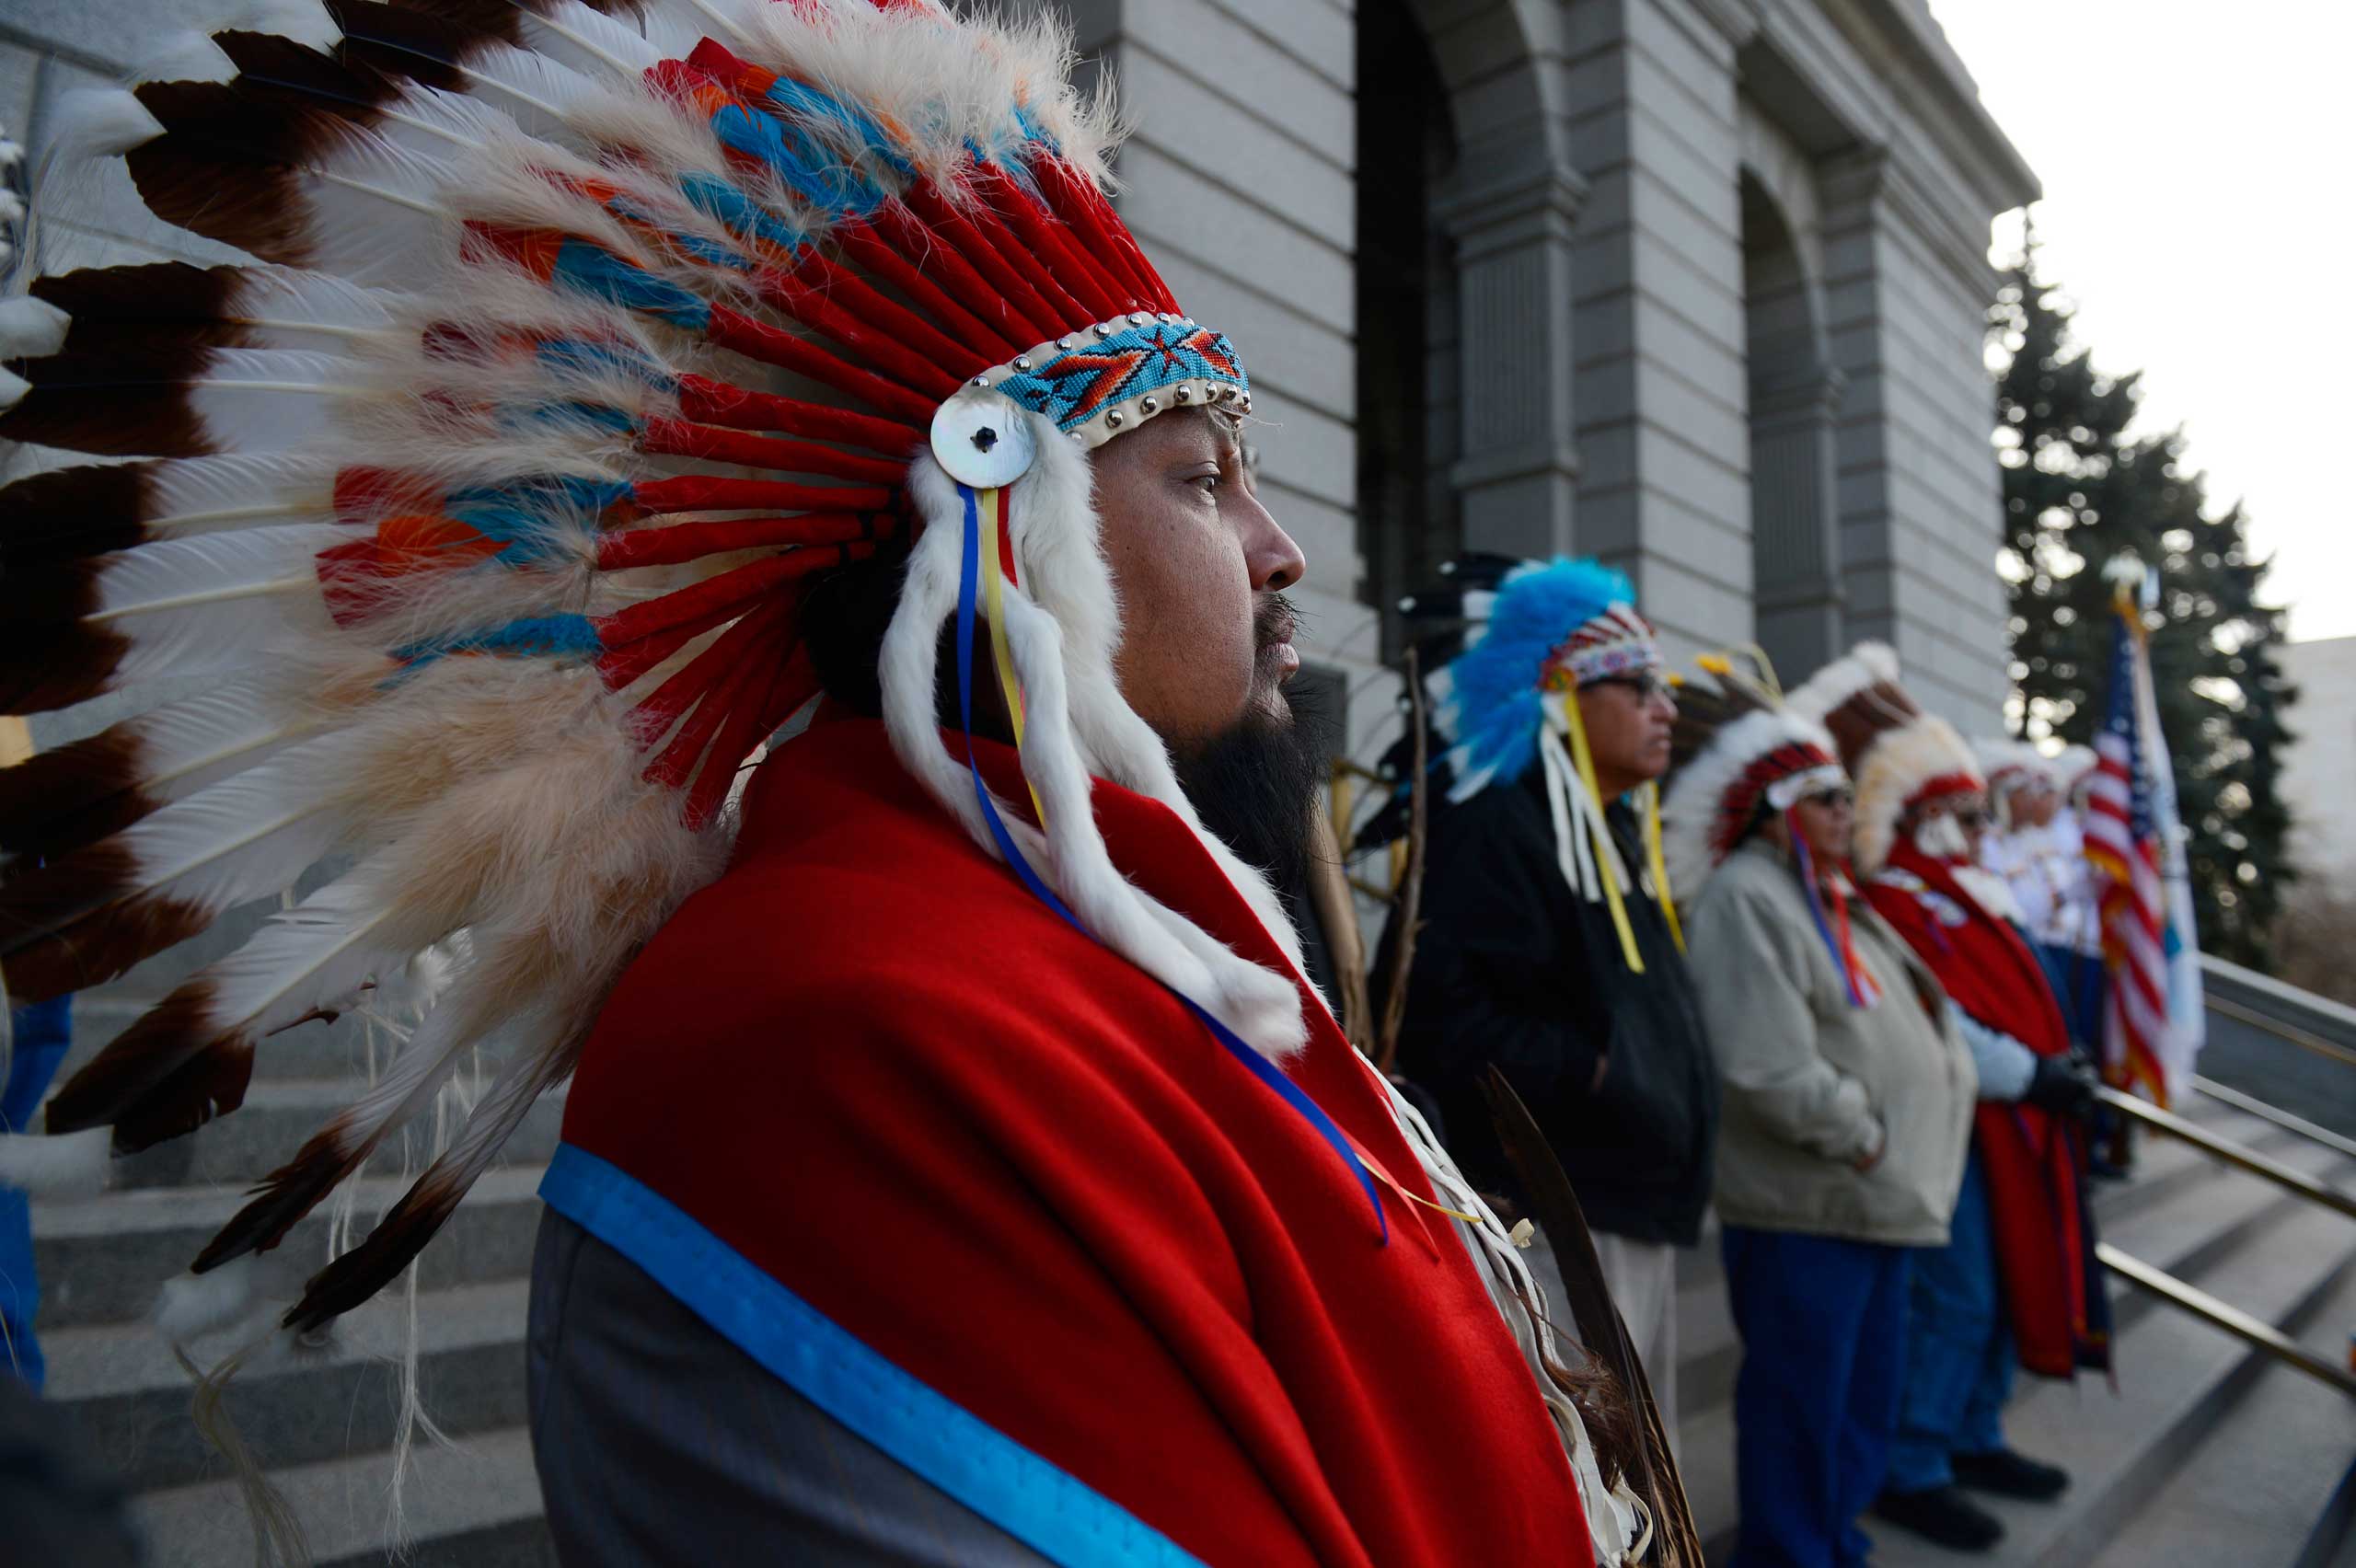 Native American Tribal member, Alan Fletcher, left, Cheyenne and Arapaho tribes, dons a traditional Native American headdress at the west steps of the Colorado Capitol, Dec. 03, 2014. (Andy Cross—Denver Post/Getty Images)